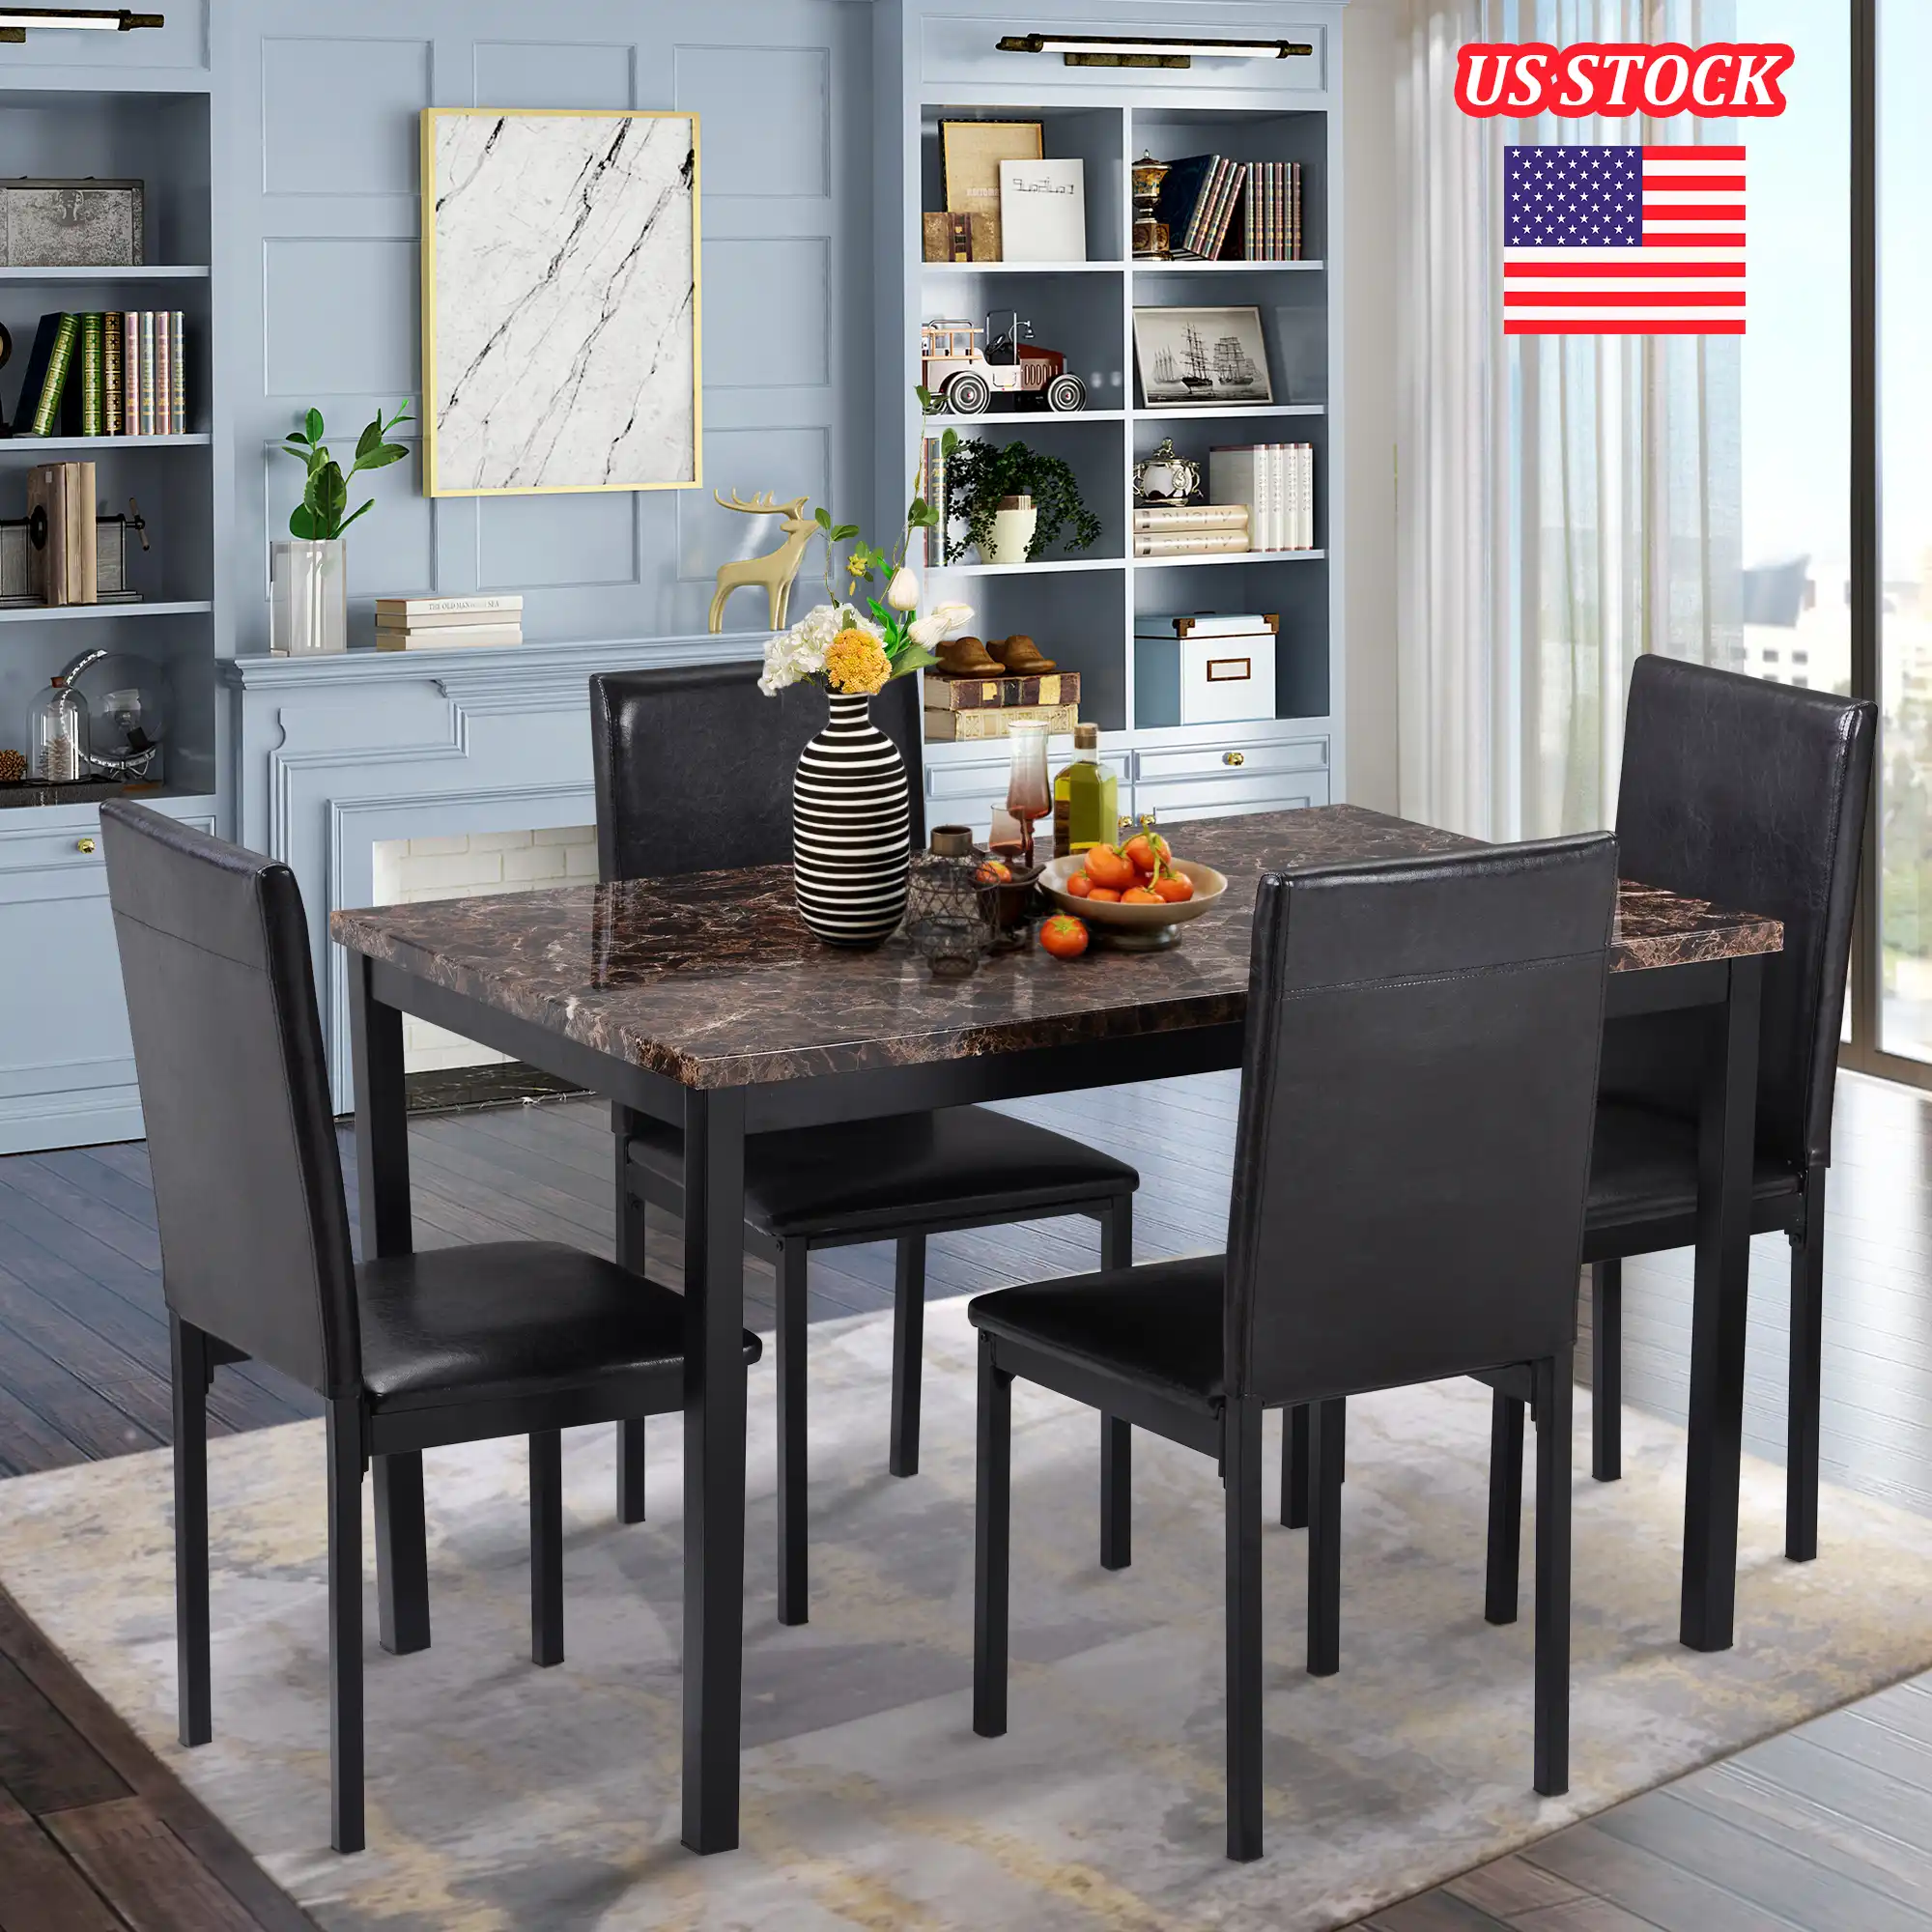 Black Dining Table And 4 Chairs Set With PU Leather Cushion Reinforced Metal Frame For Kitchen Dining Restaurant Bistro Bar Dining Room Sets AliExpress